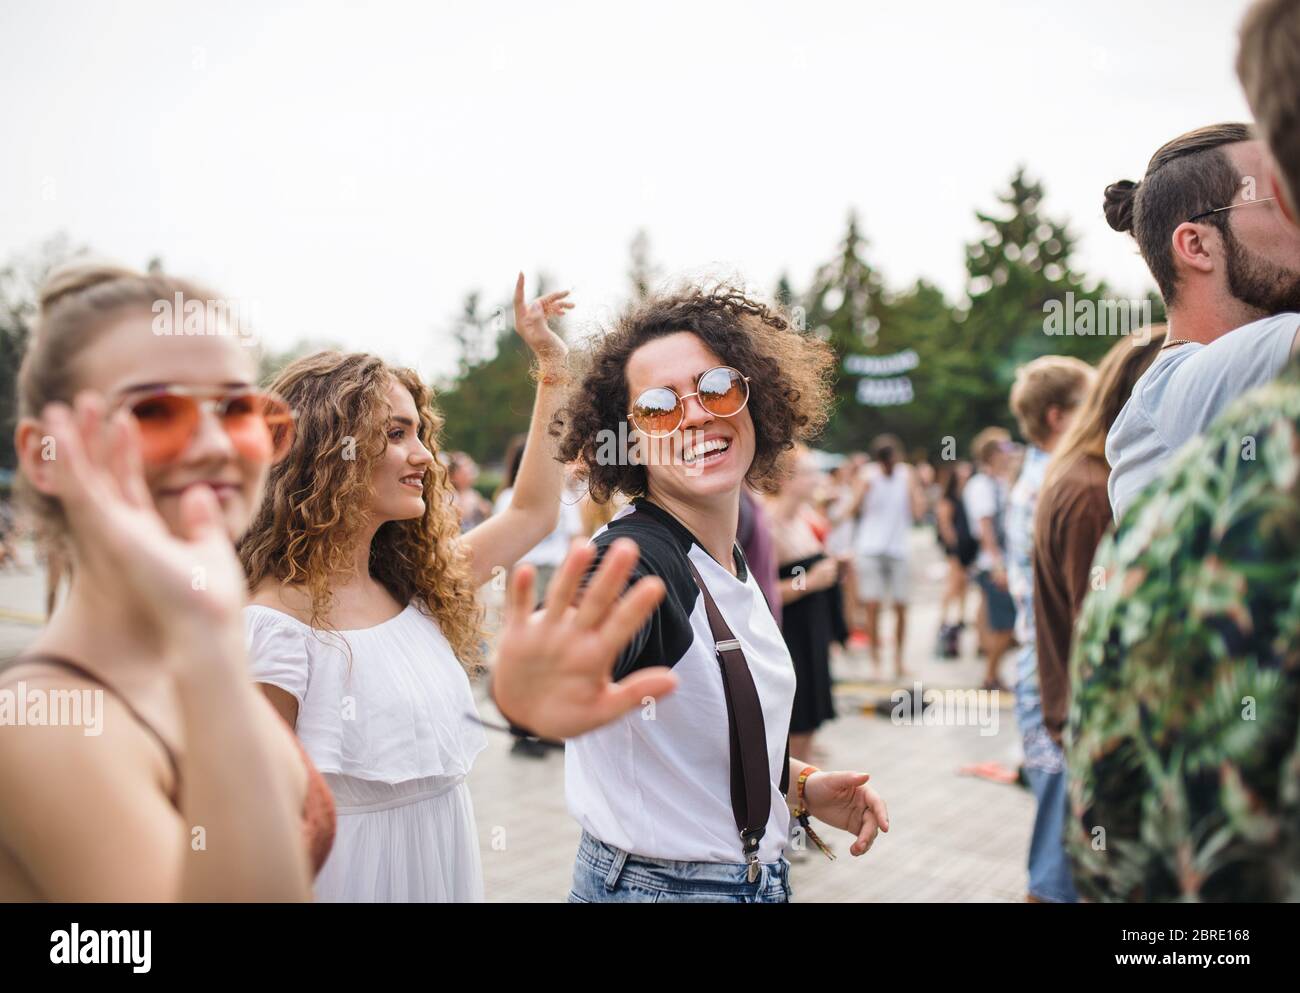 Group of young friends at summer festival. Stock Photo